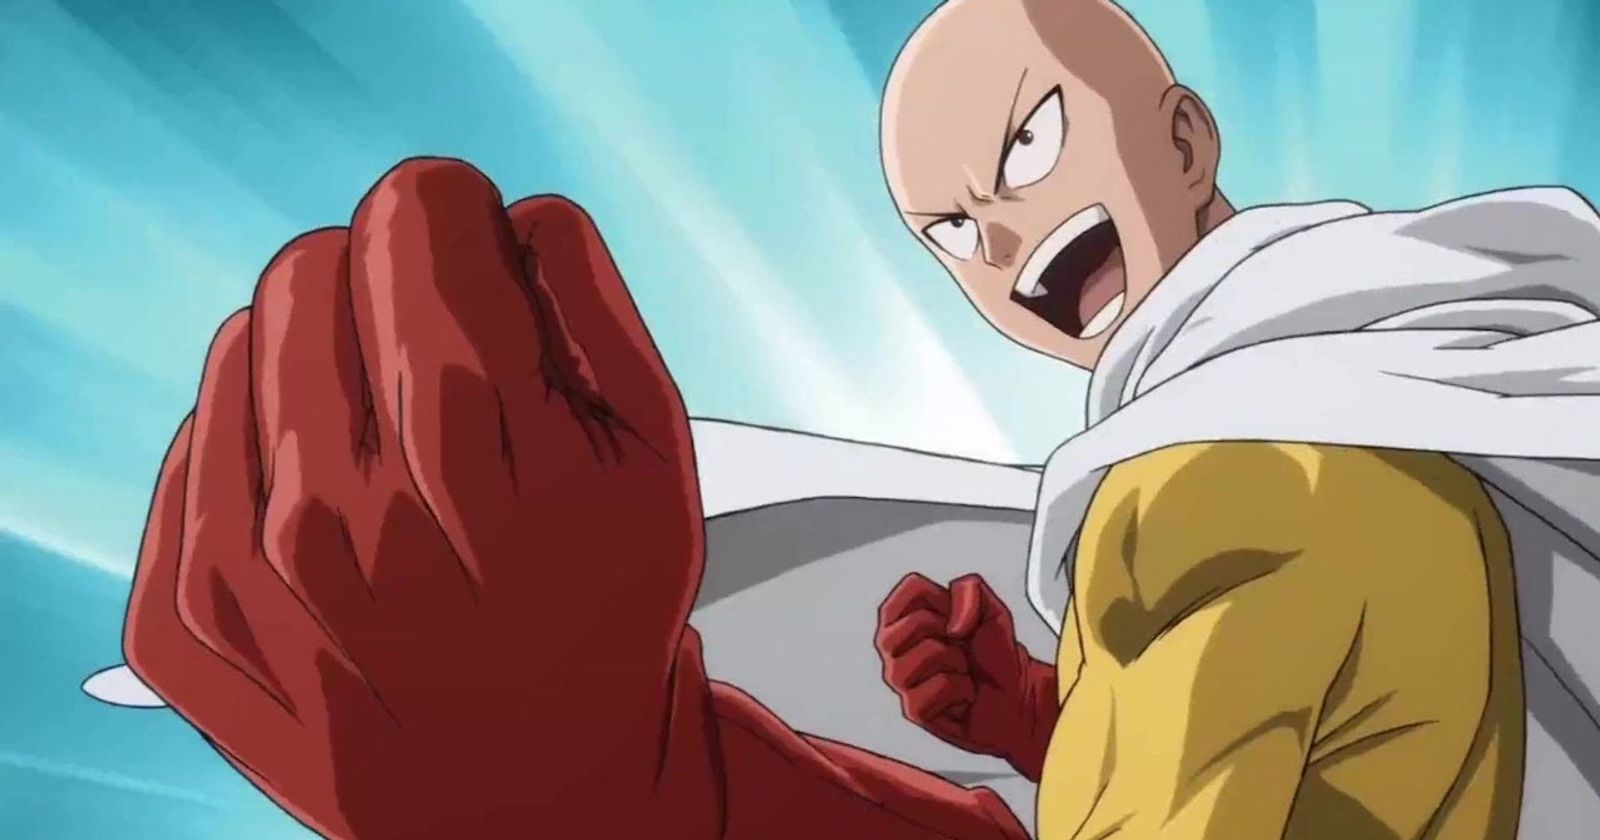 Mappa confirm to animate “One Punch Man” Season 3 - The Digital Weekly